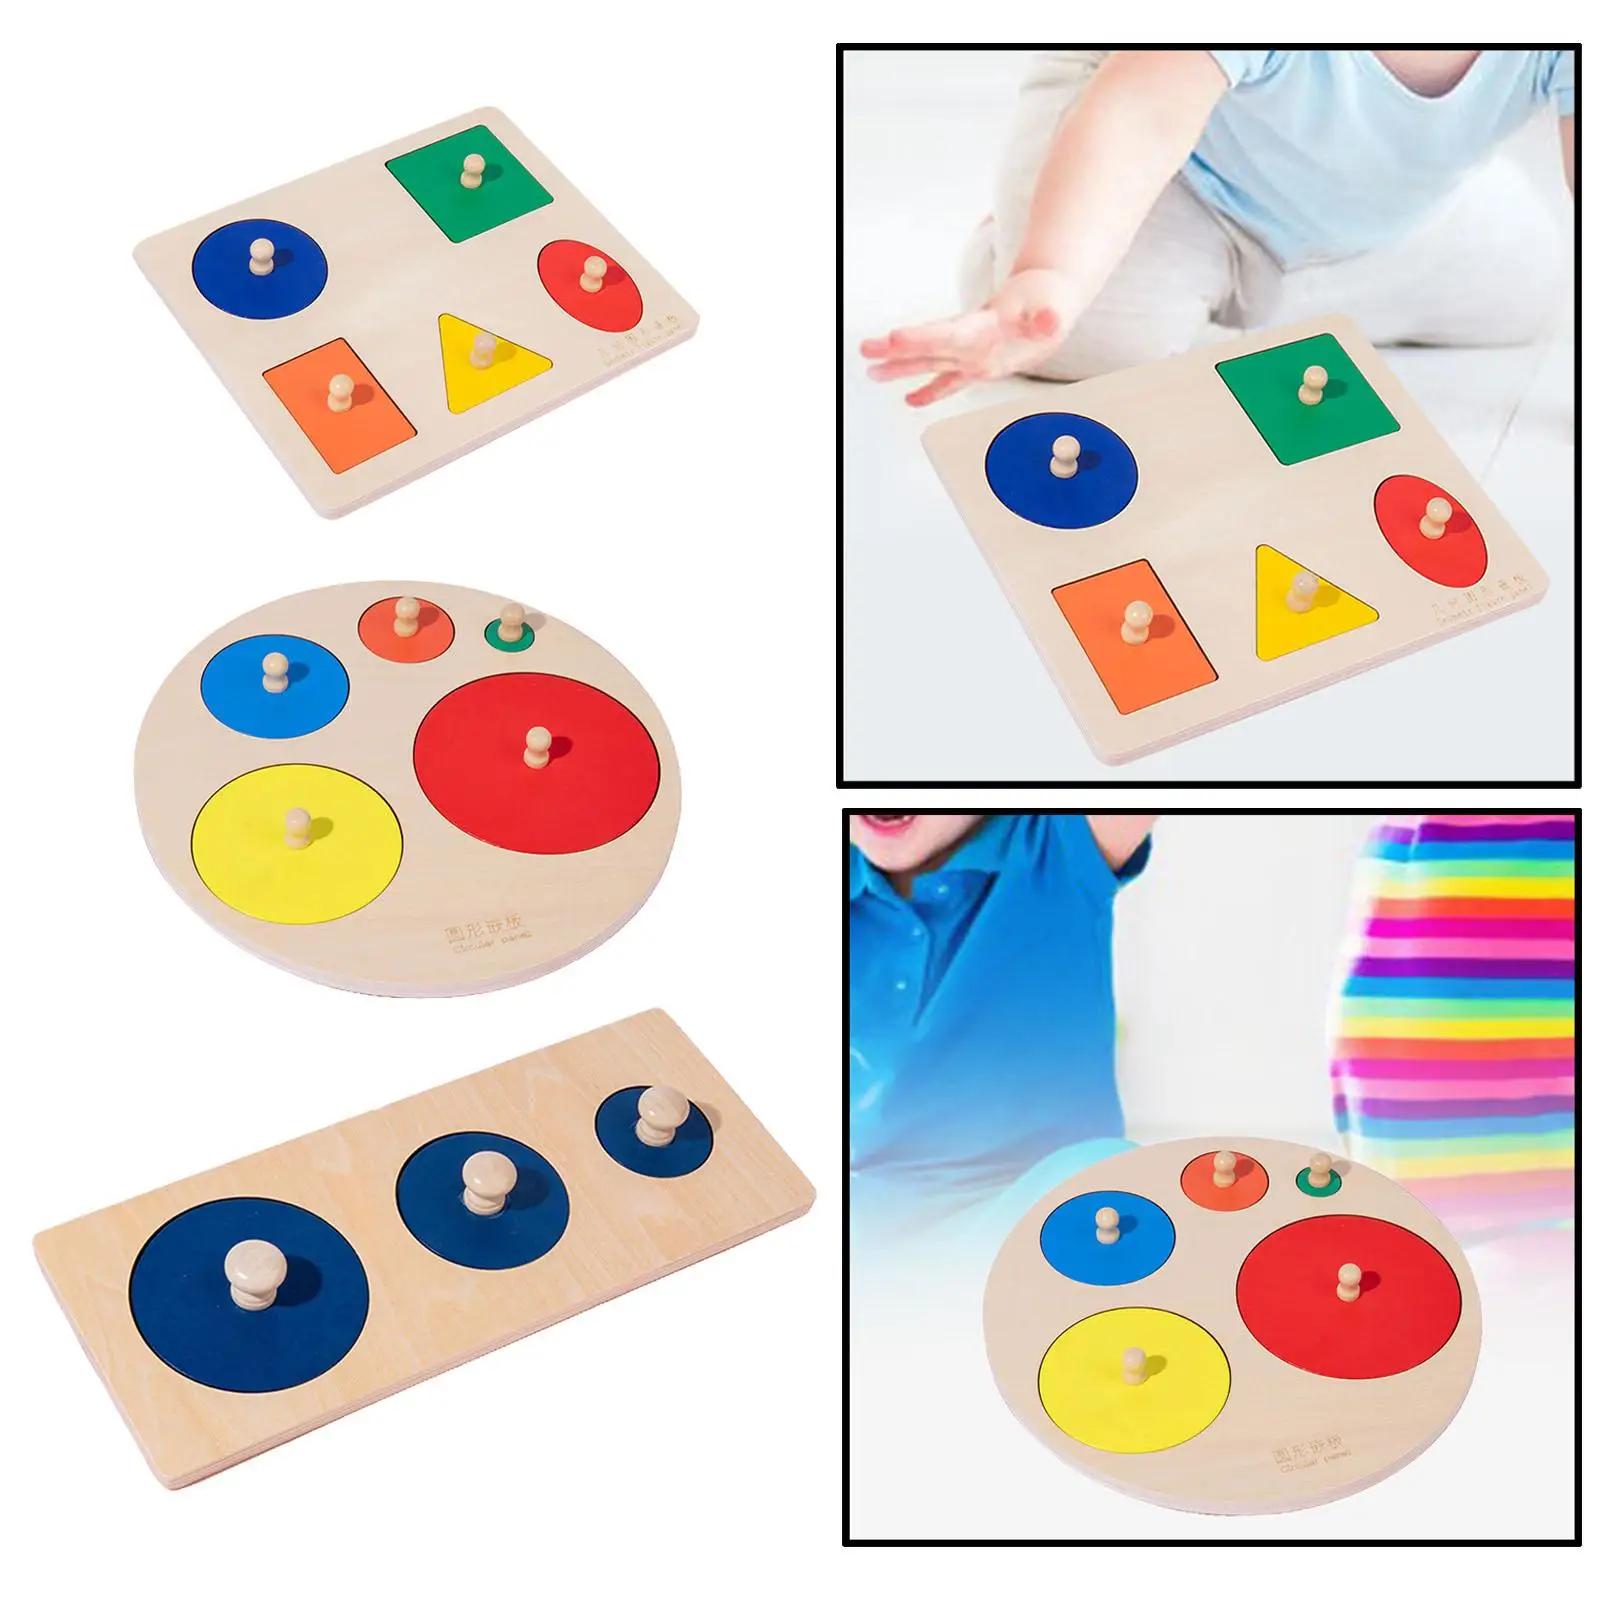 Grasp Board Learning Puzzle Preschool Learning Educational Material Sensorial Toy Wood Shape Puzzles for Game Activities Indoor